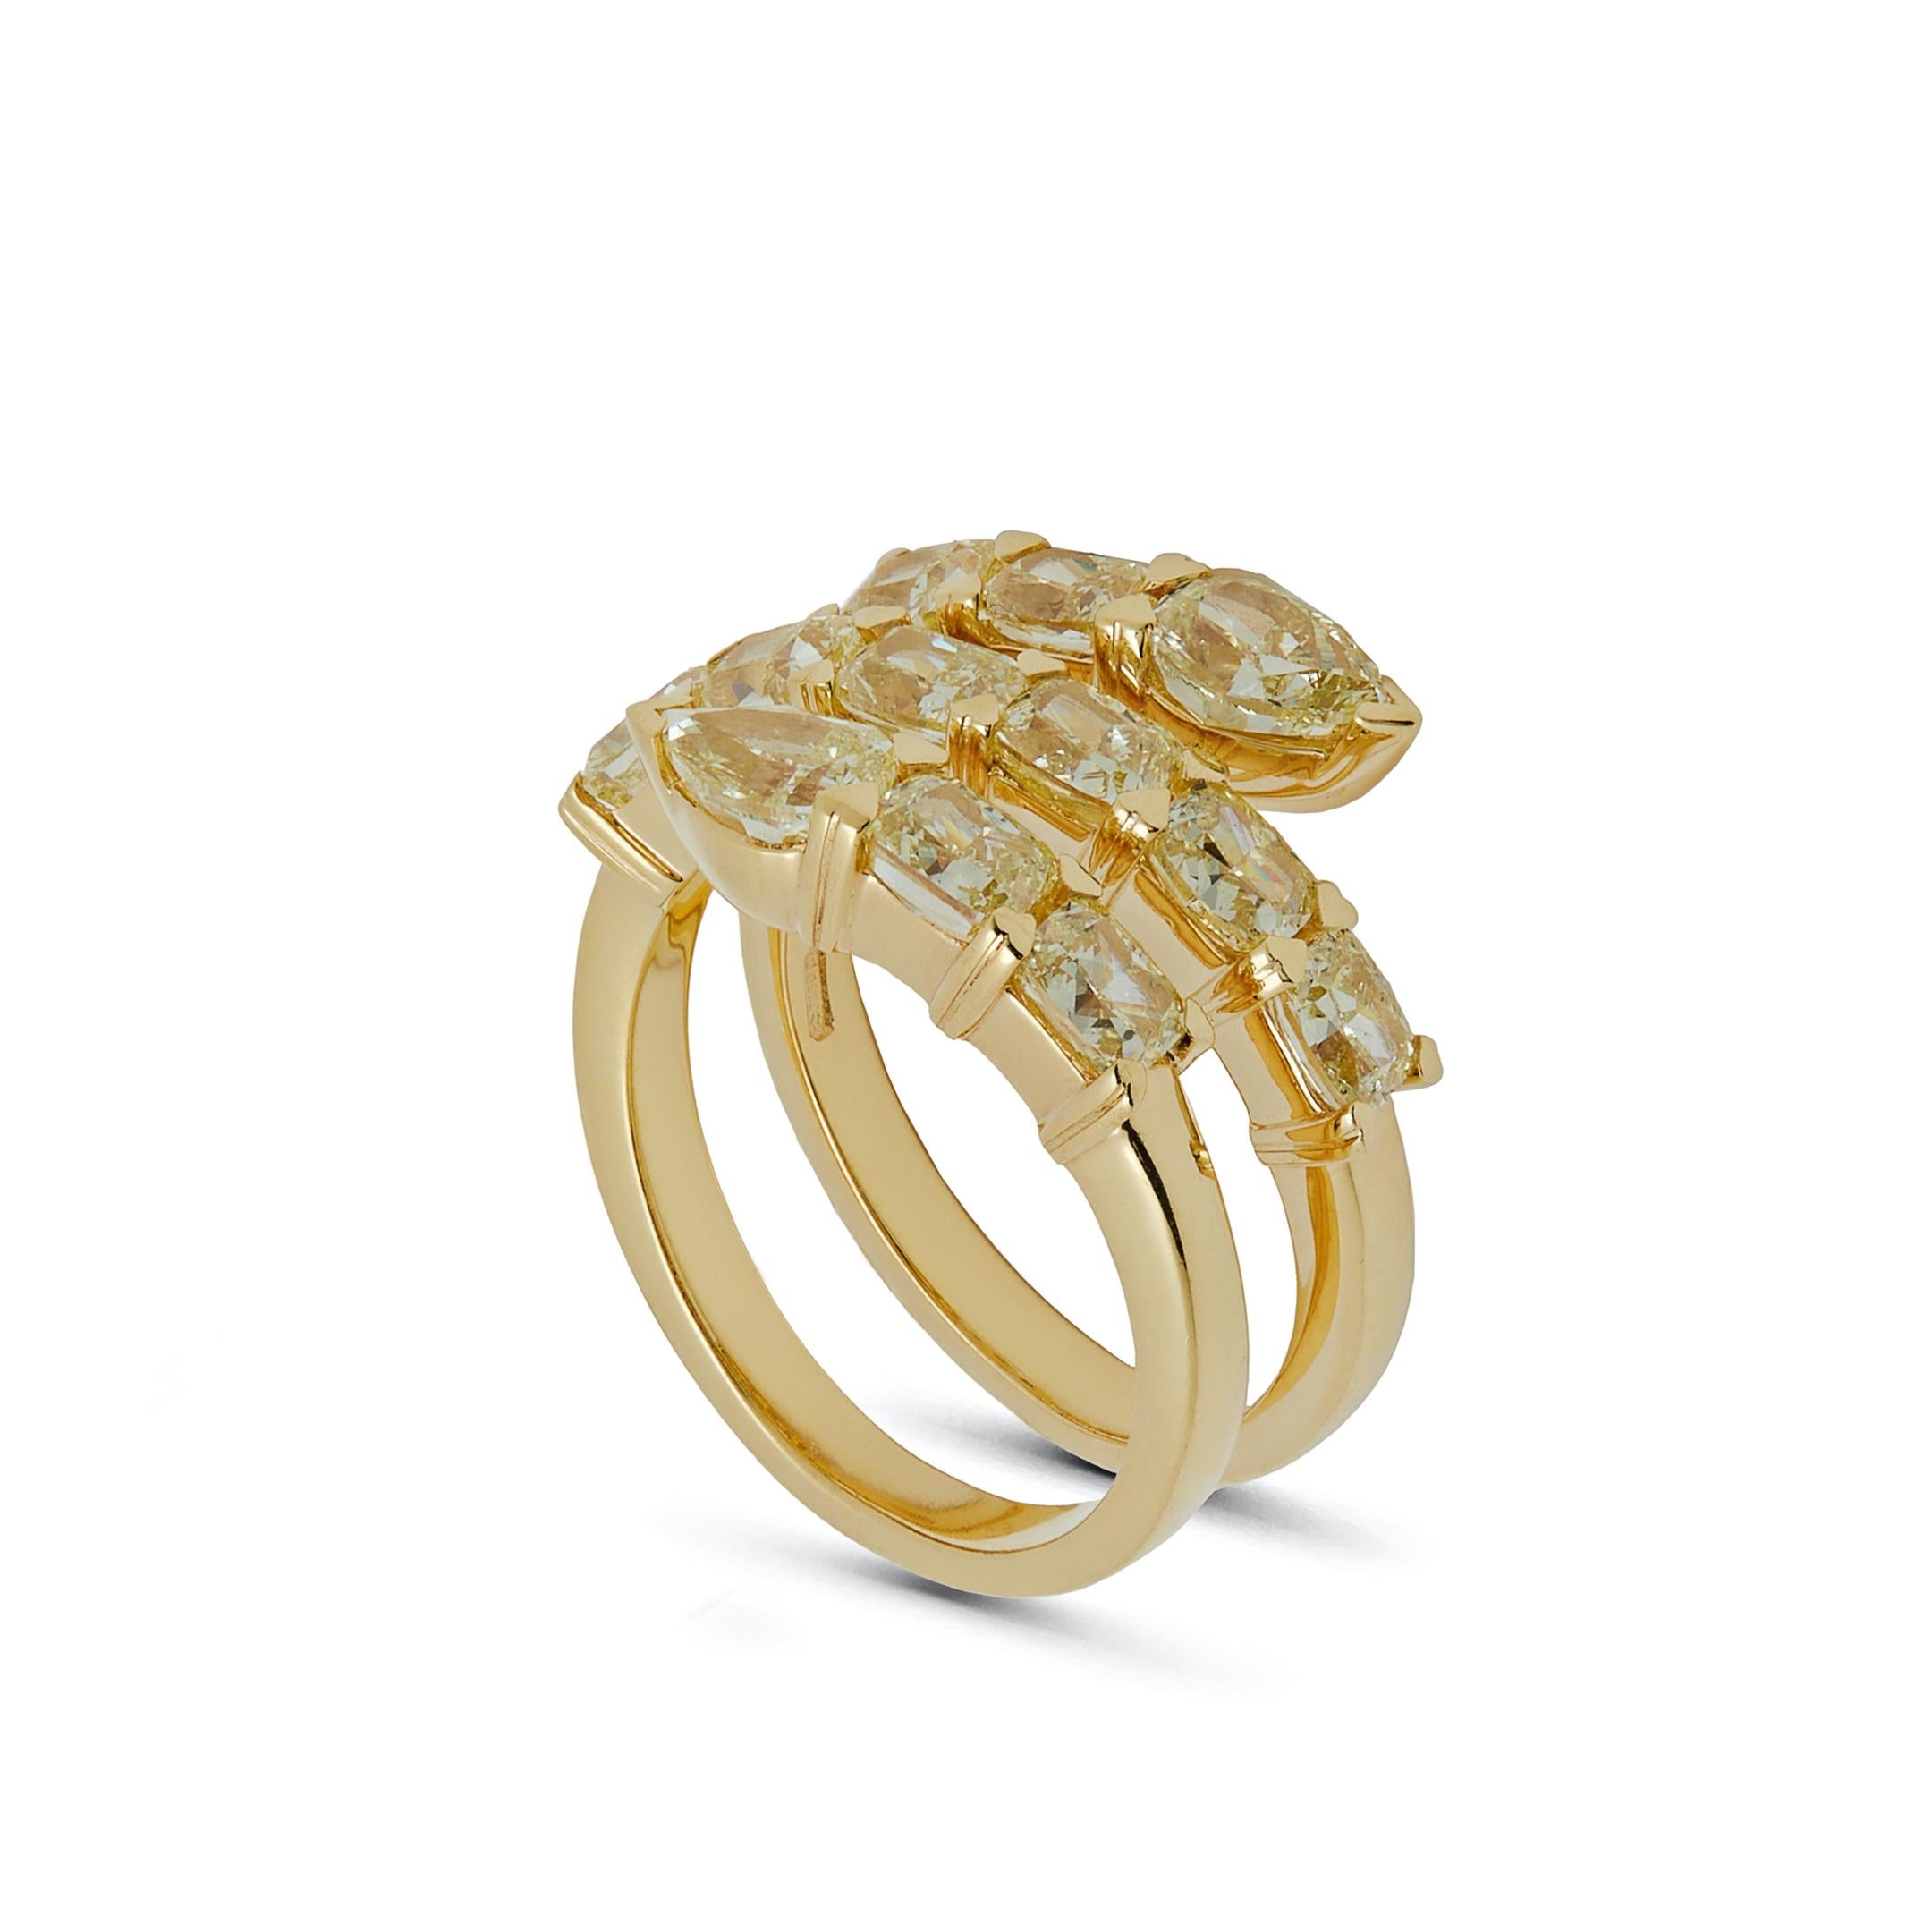 Three rows of shining gems comprise the exuberant Yellow Diamond Twist Ring. Stunning pear-shaped and oval-cut yellow diamonds are expertly matched with warm 18-karat yellow gold. Wear your ring with denim, heels and your favorite Hermés bag for the